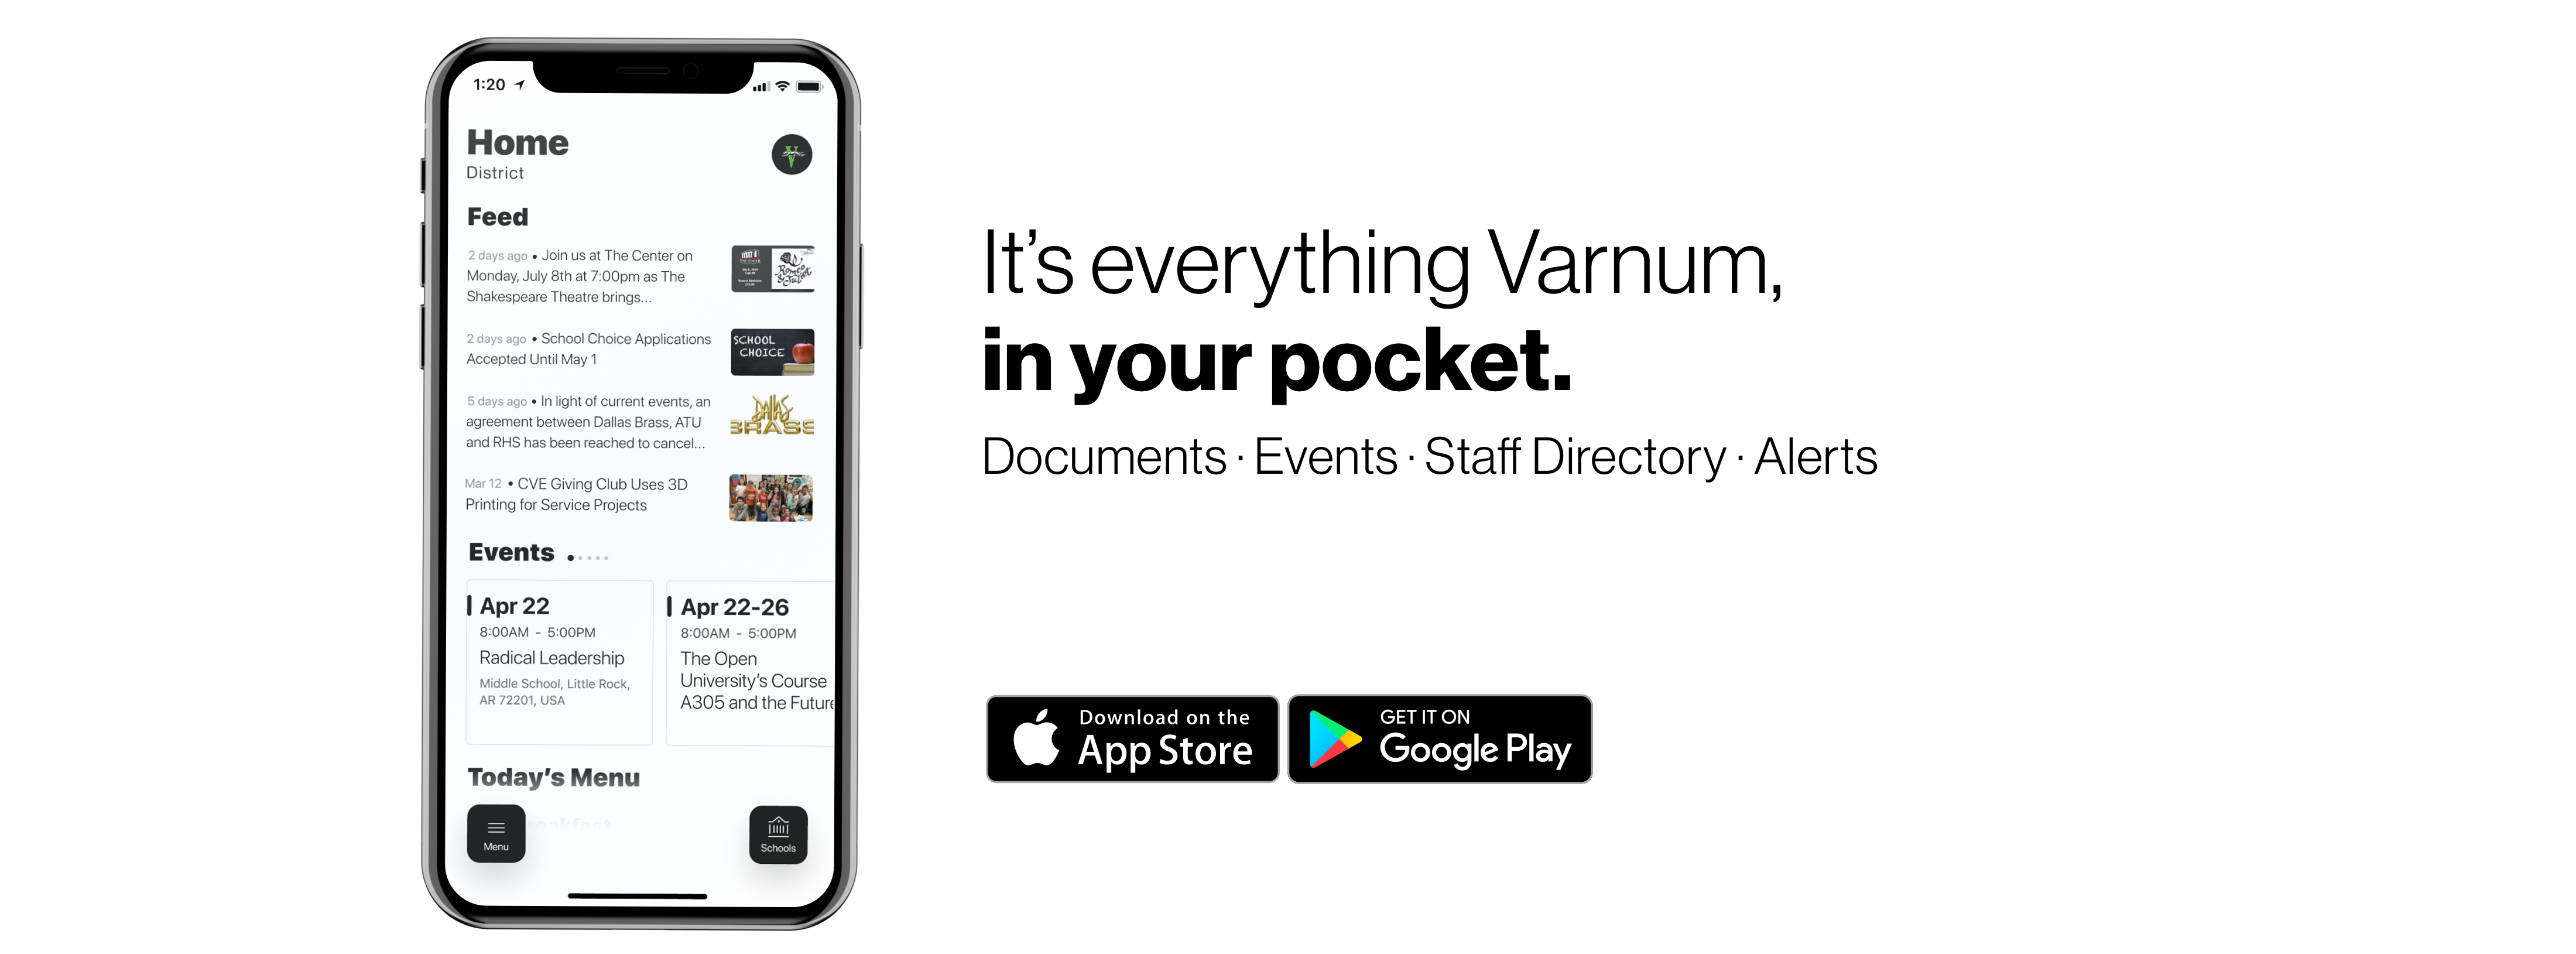 IT'S EVERYTHING VARNUM, IN YOUR POCKET.